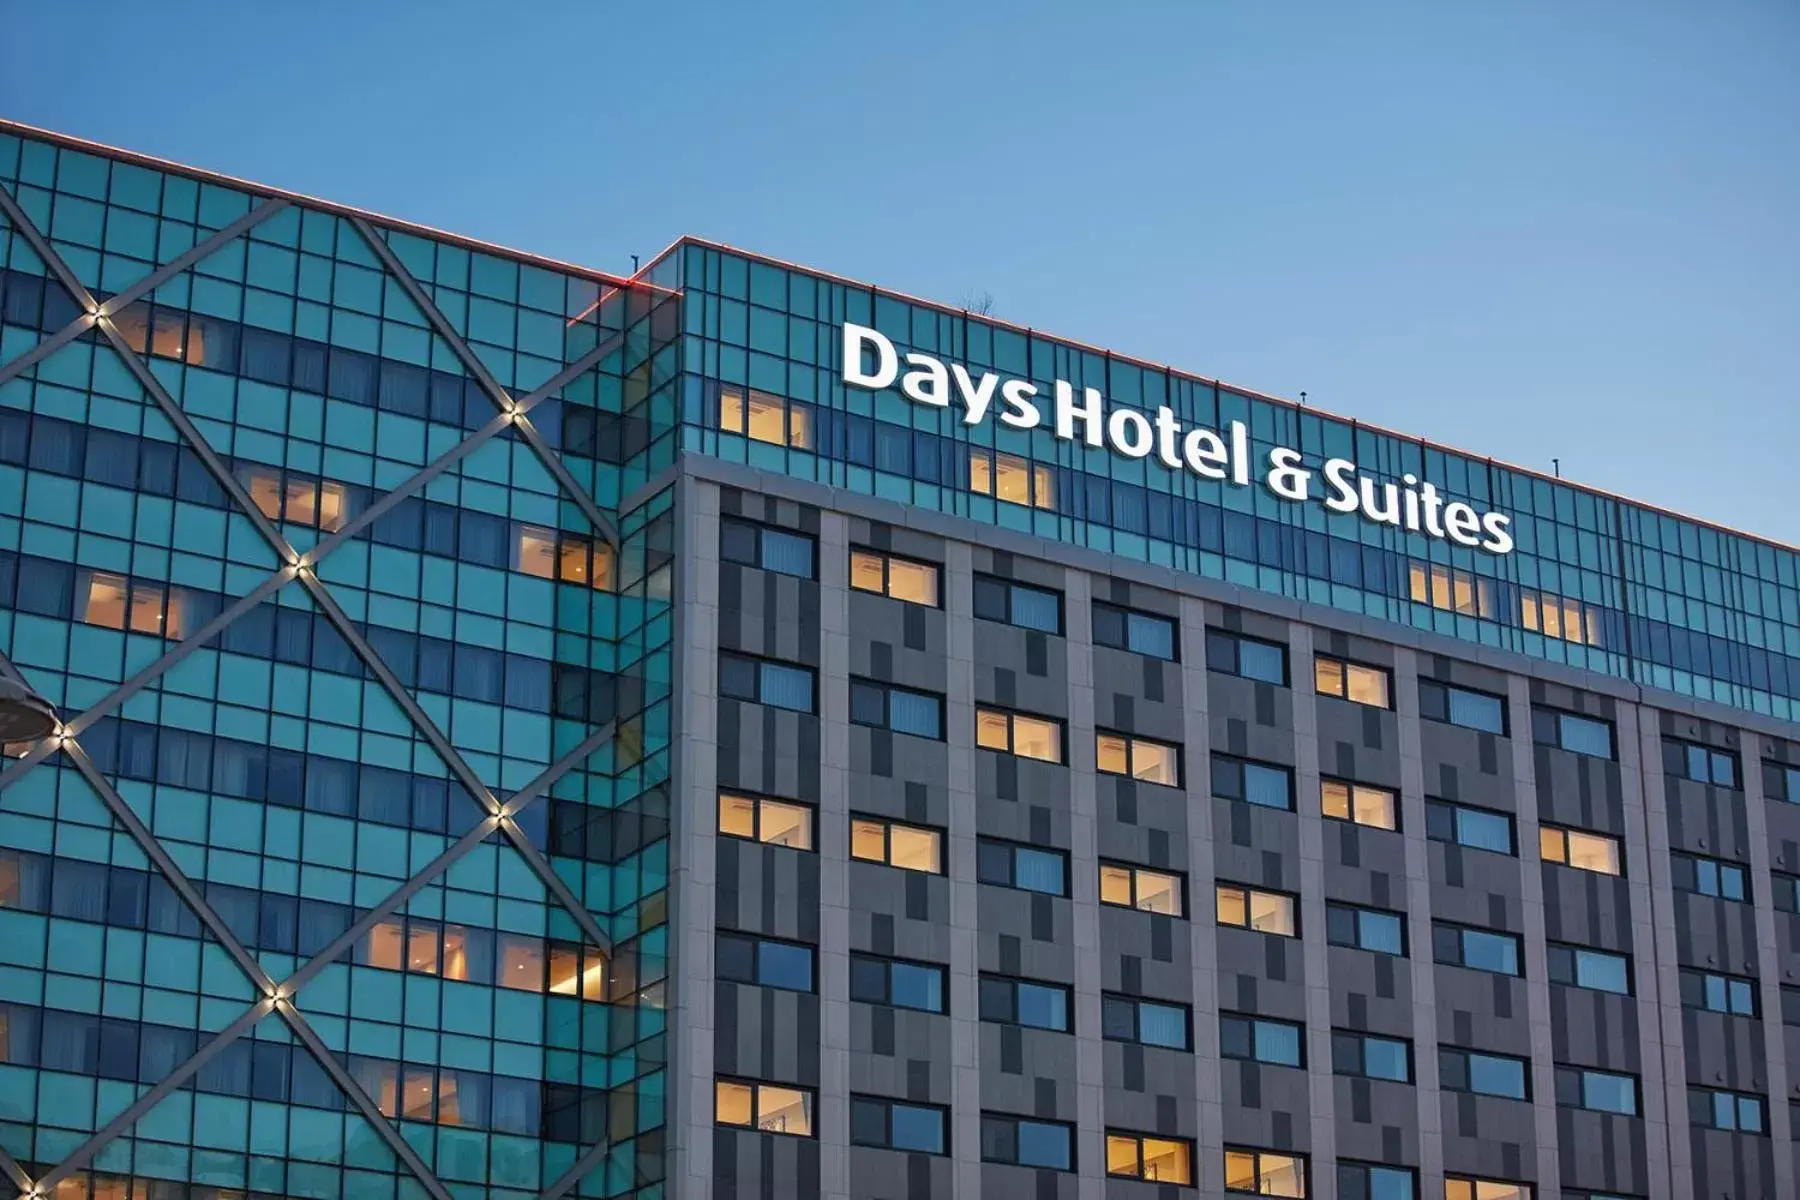 Property building in Days Hotel & Suites by Wyndham Incheon Airport